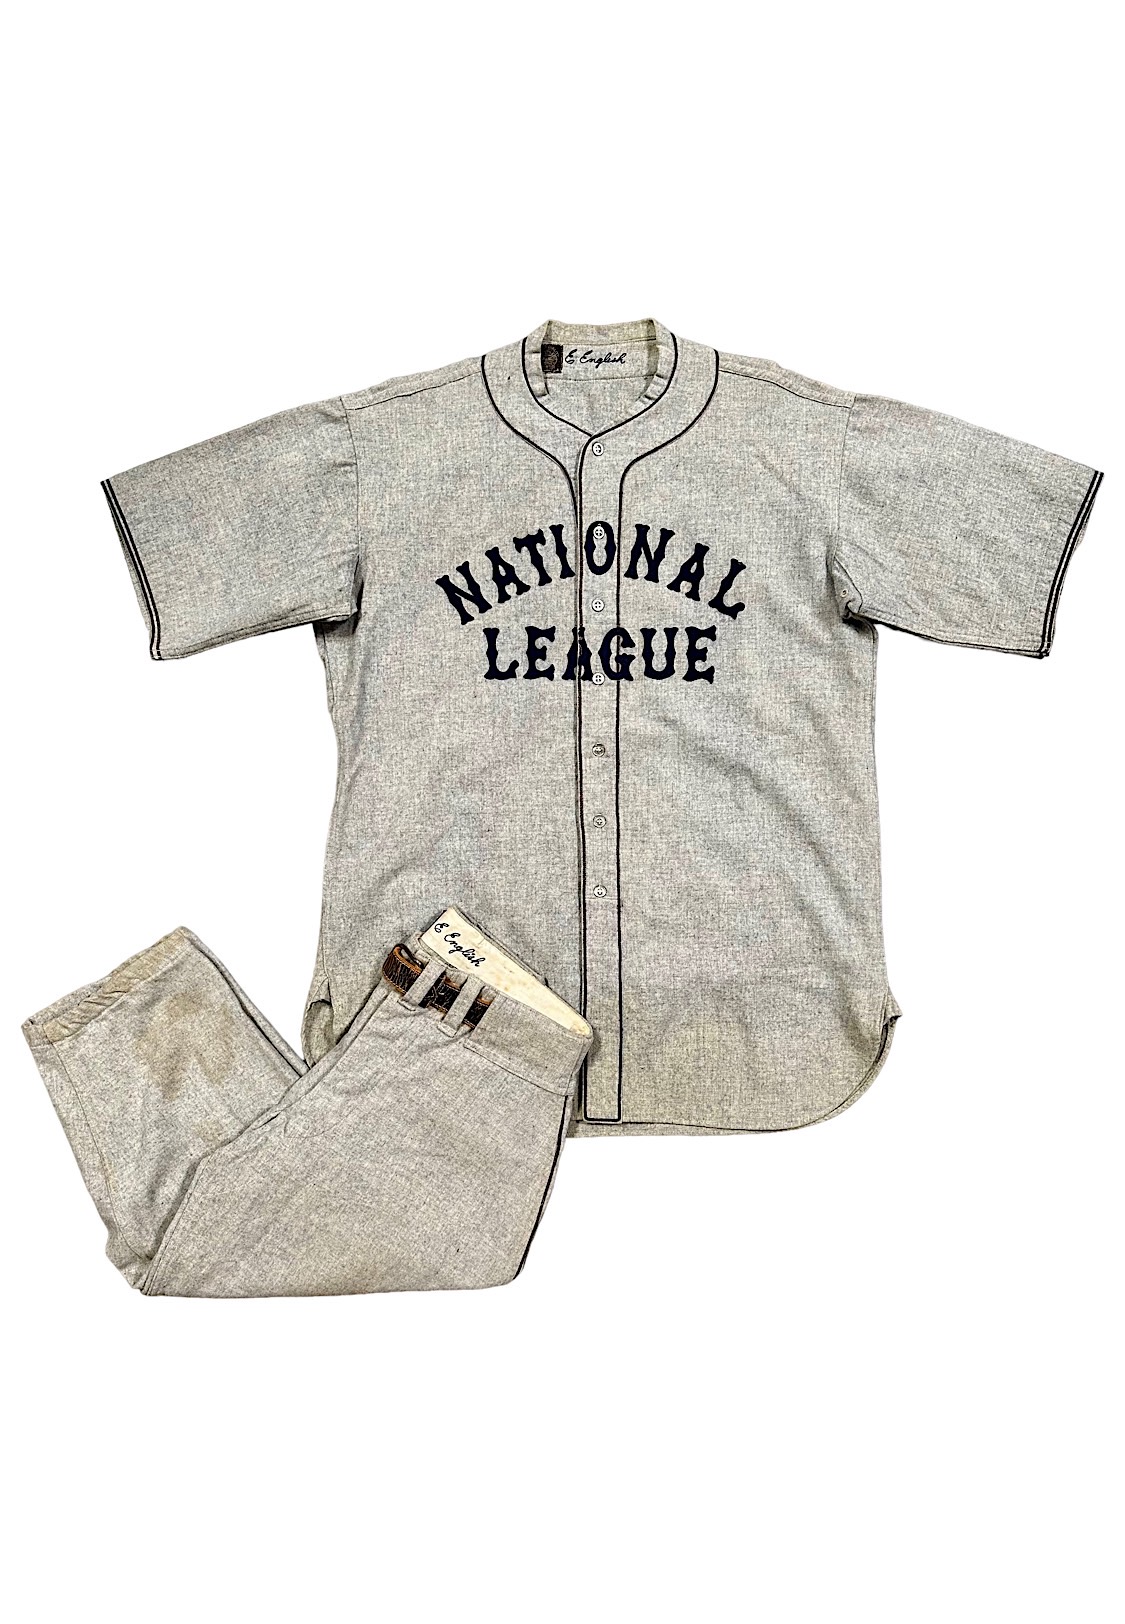 Rare Sight: 1933 NL All-Star Uniform Coming to Auction